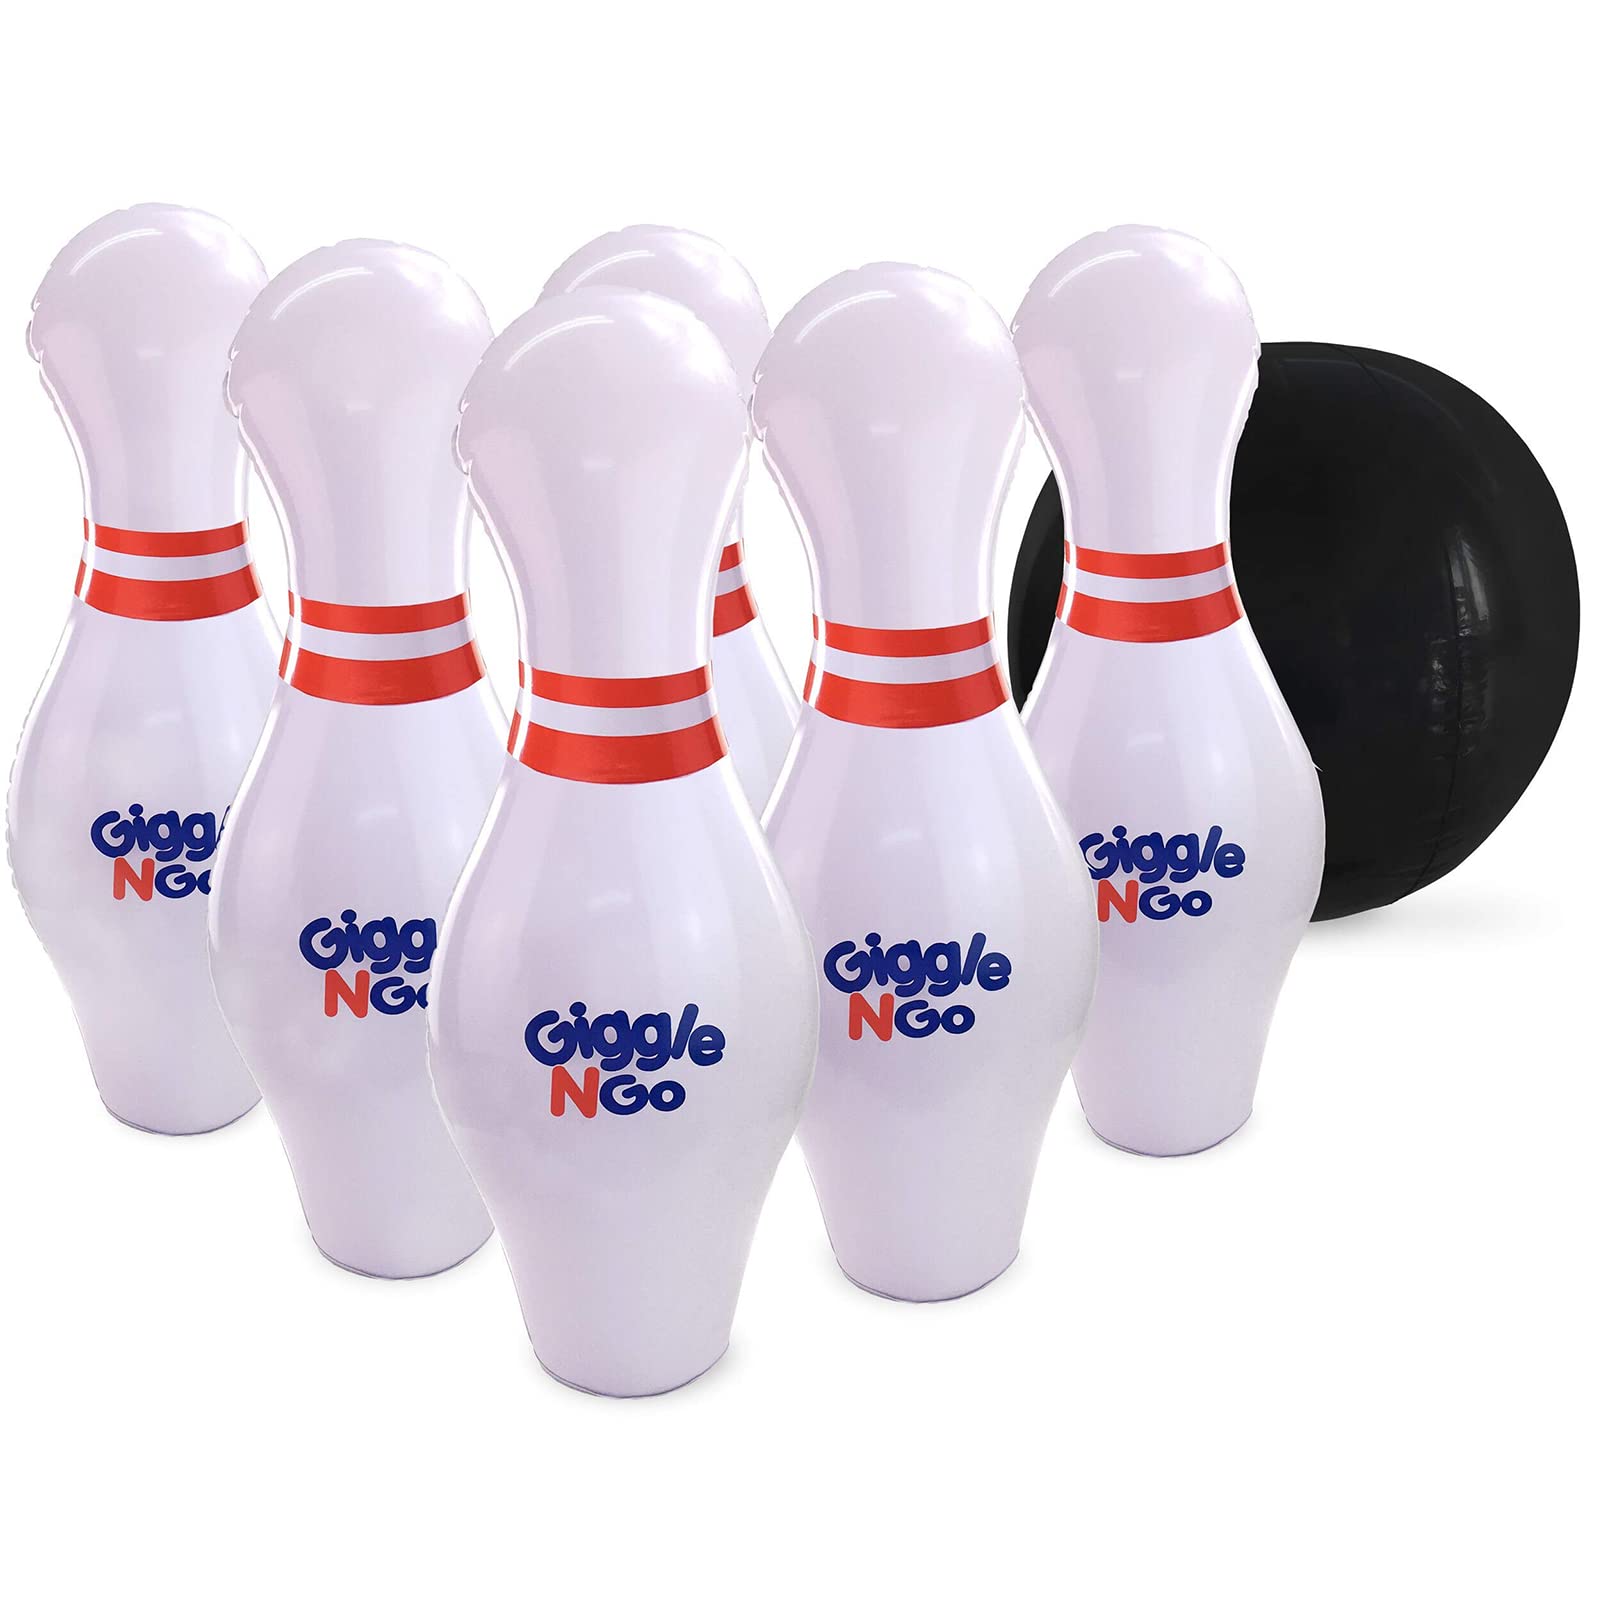 Giggle N Go Kids Bowling Set Indoor Games or Outdoor Games for Kids. Hilariously Fun Giant Yard Games for Kids and Adults. Fun S